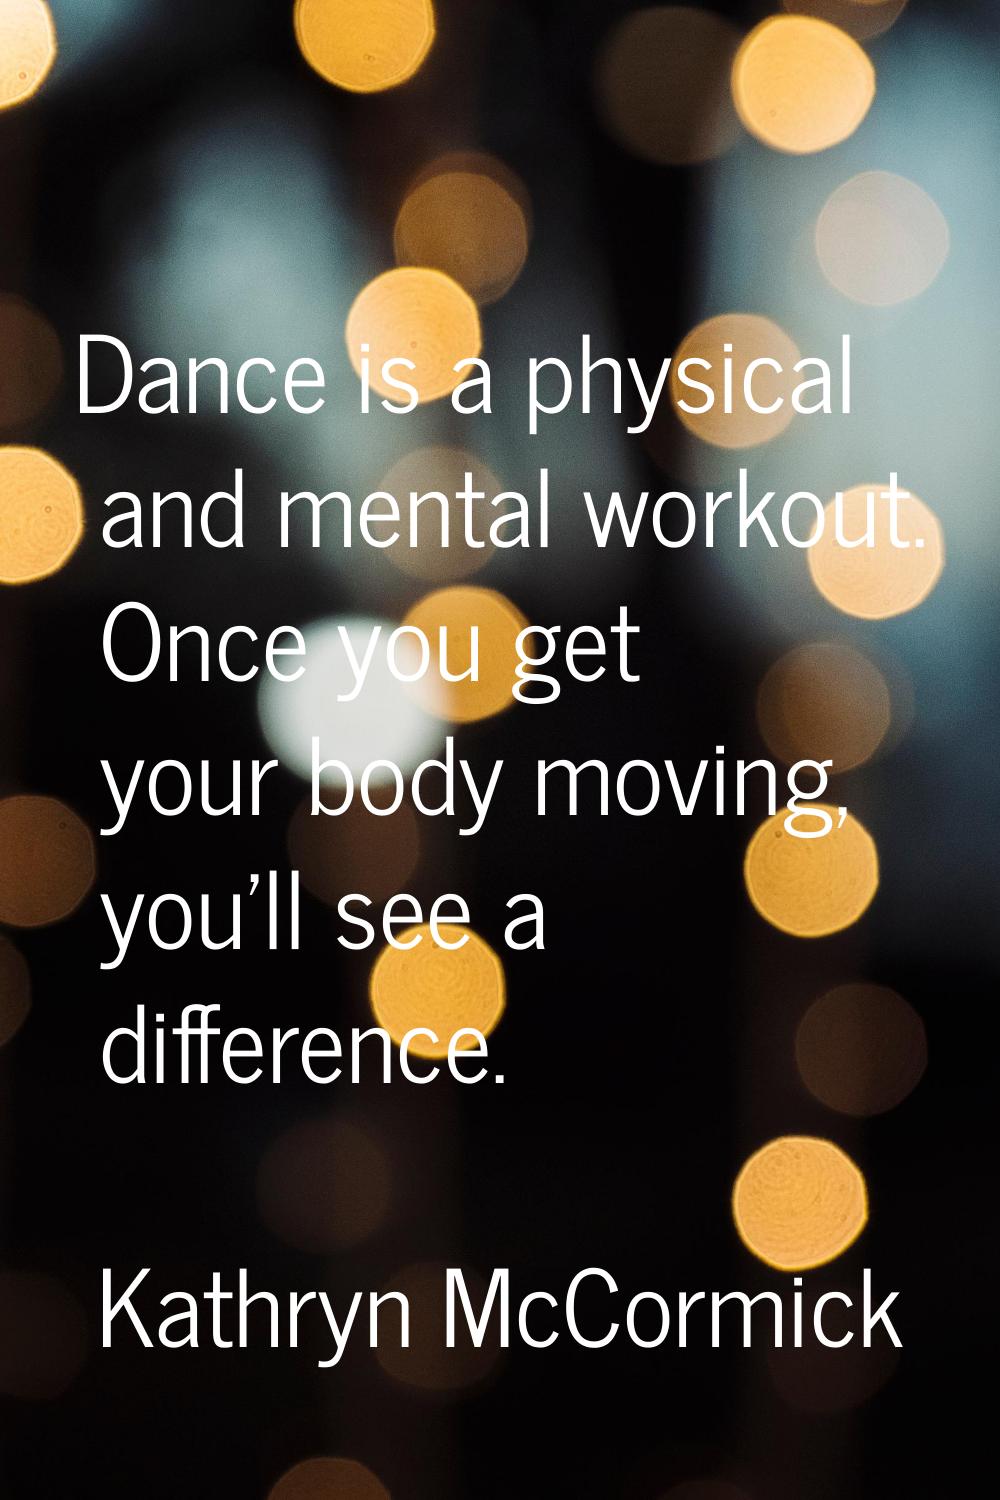 Dance is a physical and mental workout. Once you get your body moving, you'll see a difference.